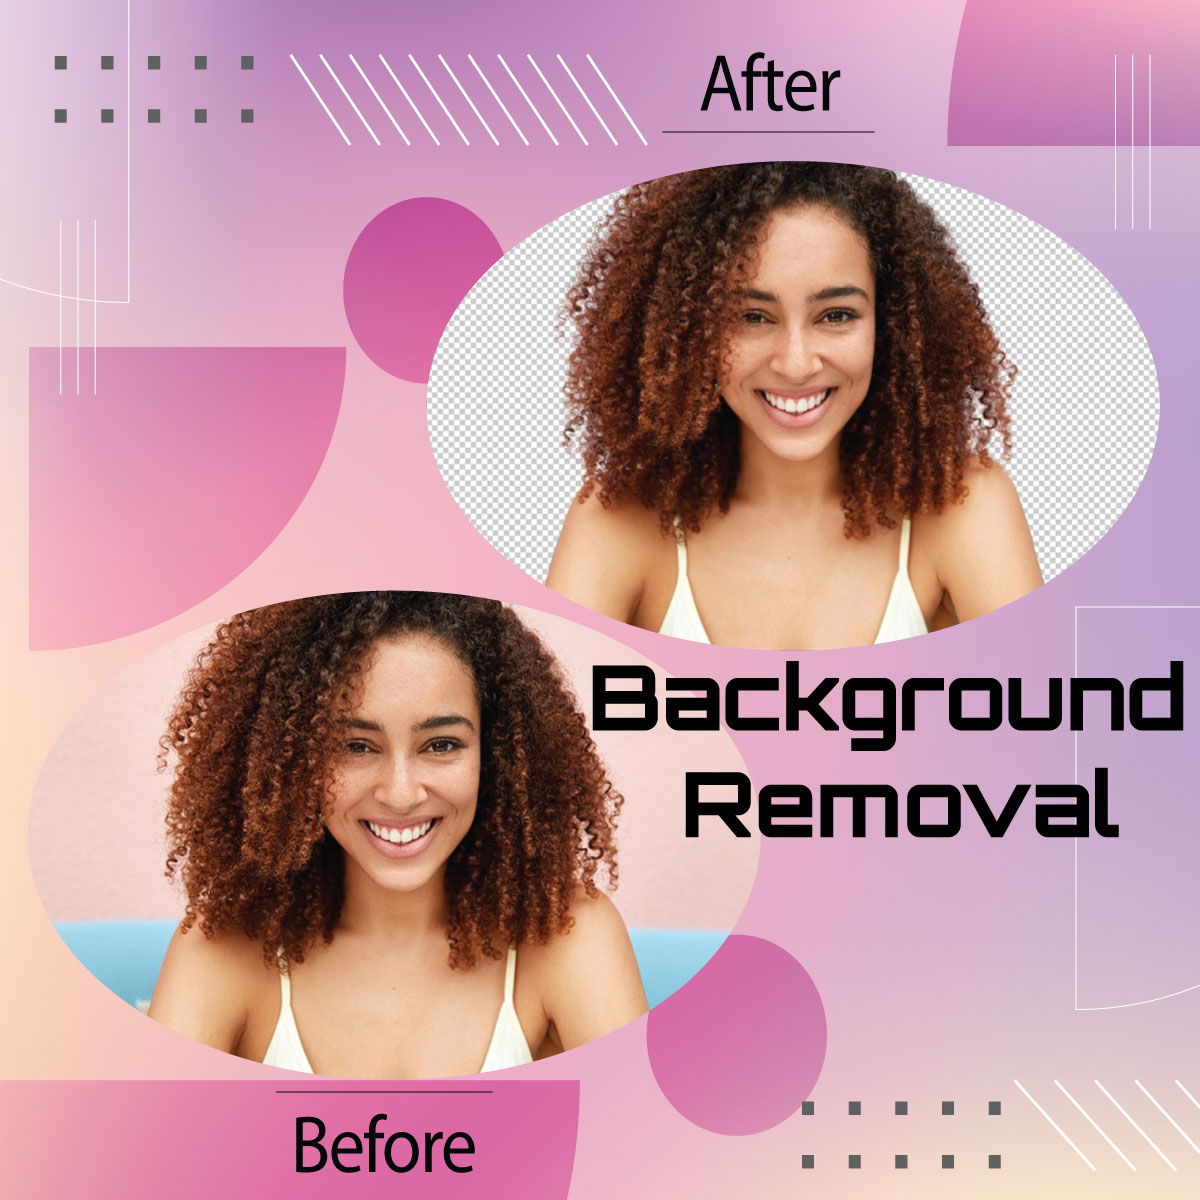 🌟 Enhance your product images! Don't let clutter steal the show. Master quick cut-out techniques today.
👉 [Check It Out ; rb.gy/vxgx6e 

#ProductPhotography #DigitalMarketing #PhotoshopTips